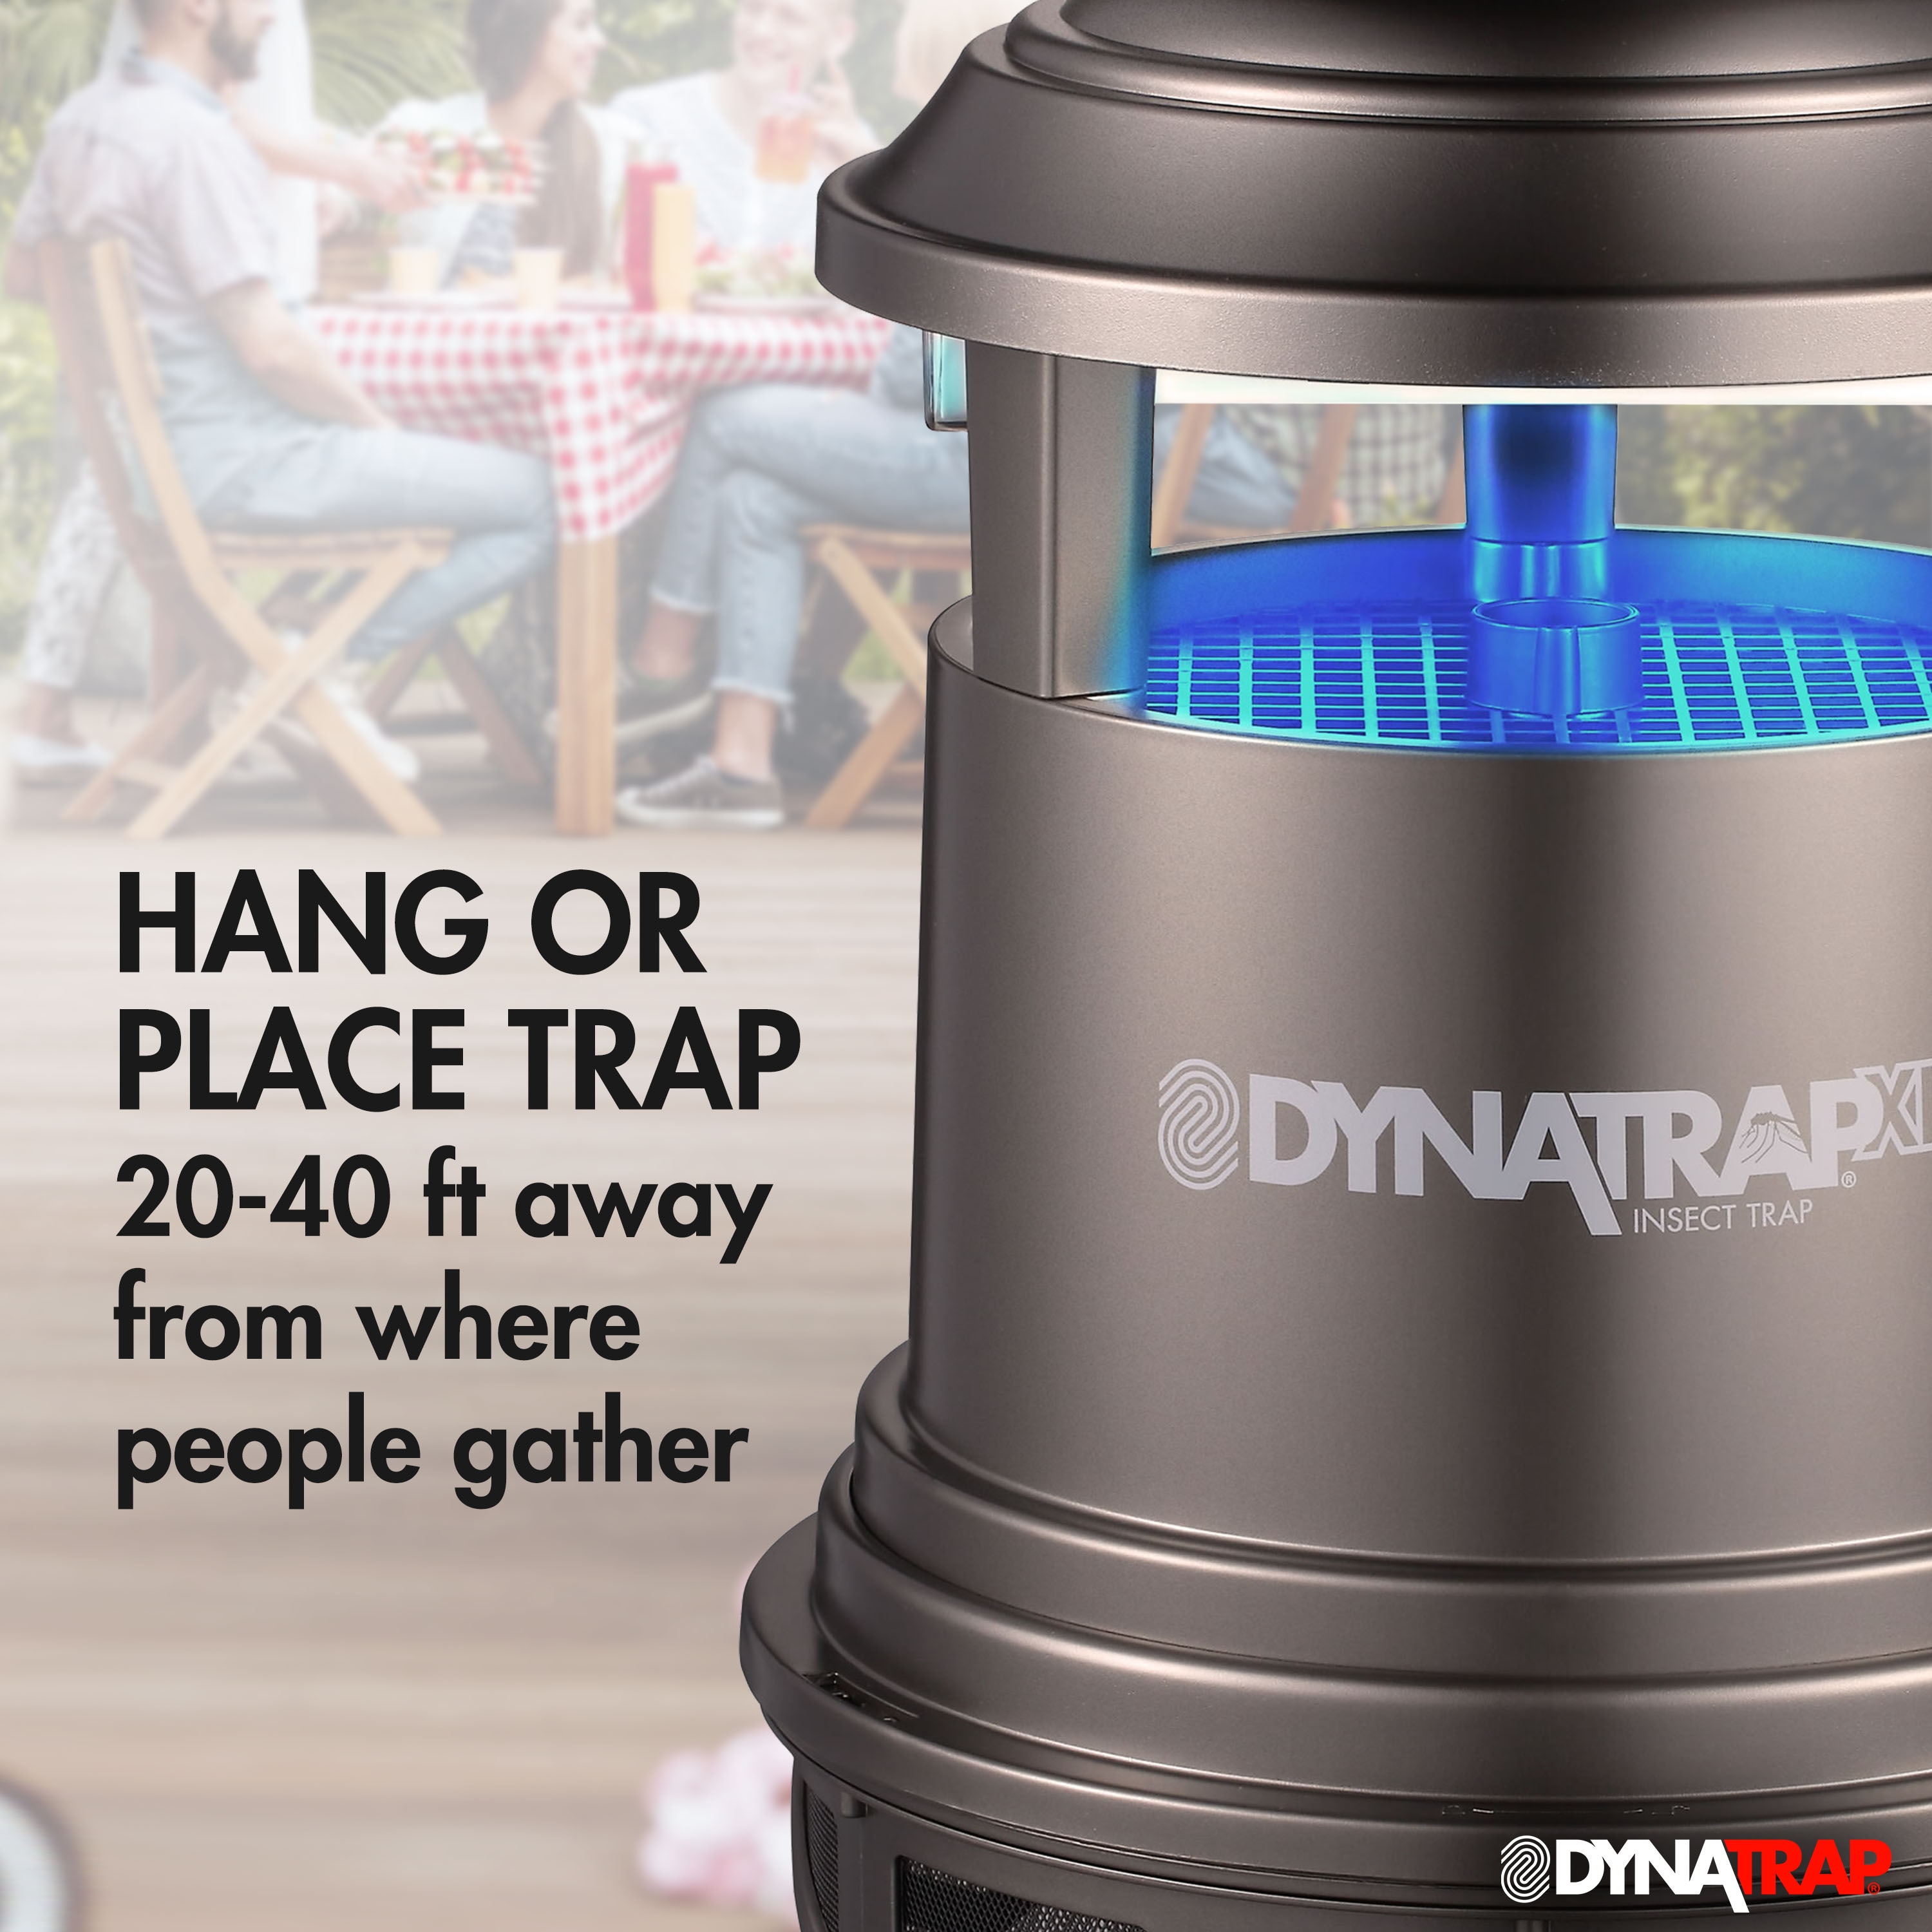 DynaTrap DT2000XLPSR Large Mosquito & Flying Insect Trap – Kills